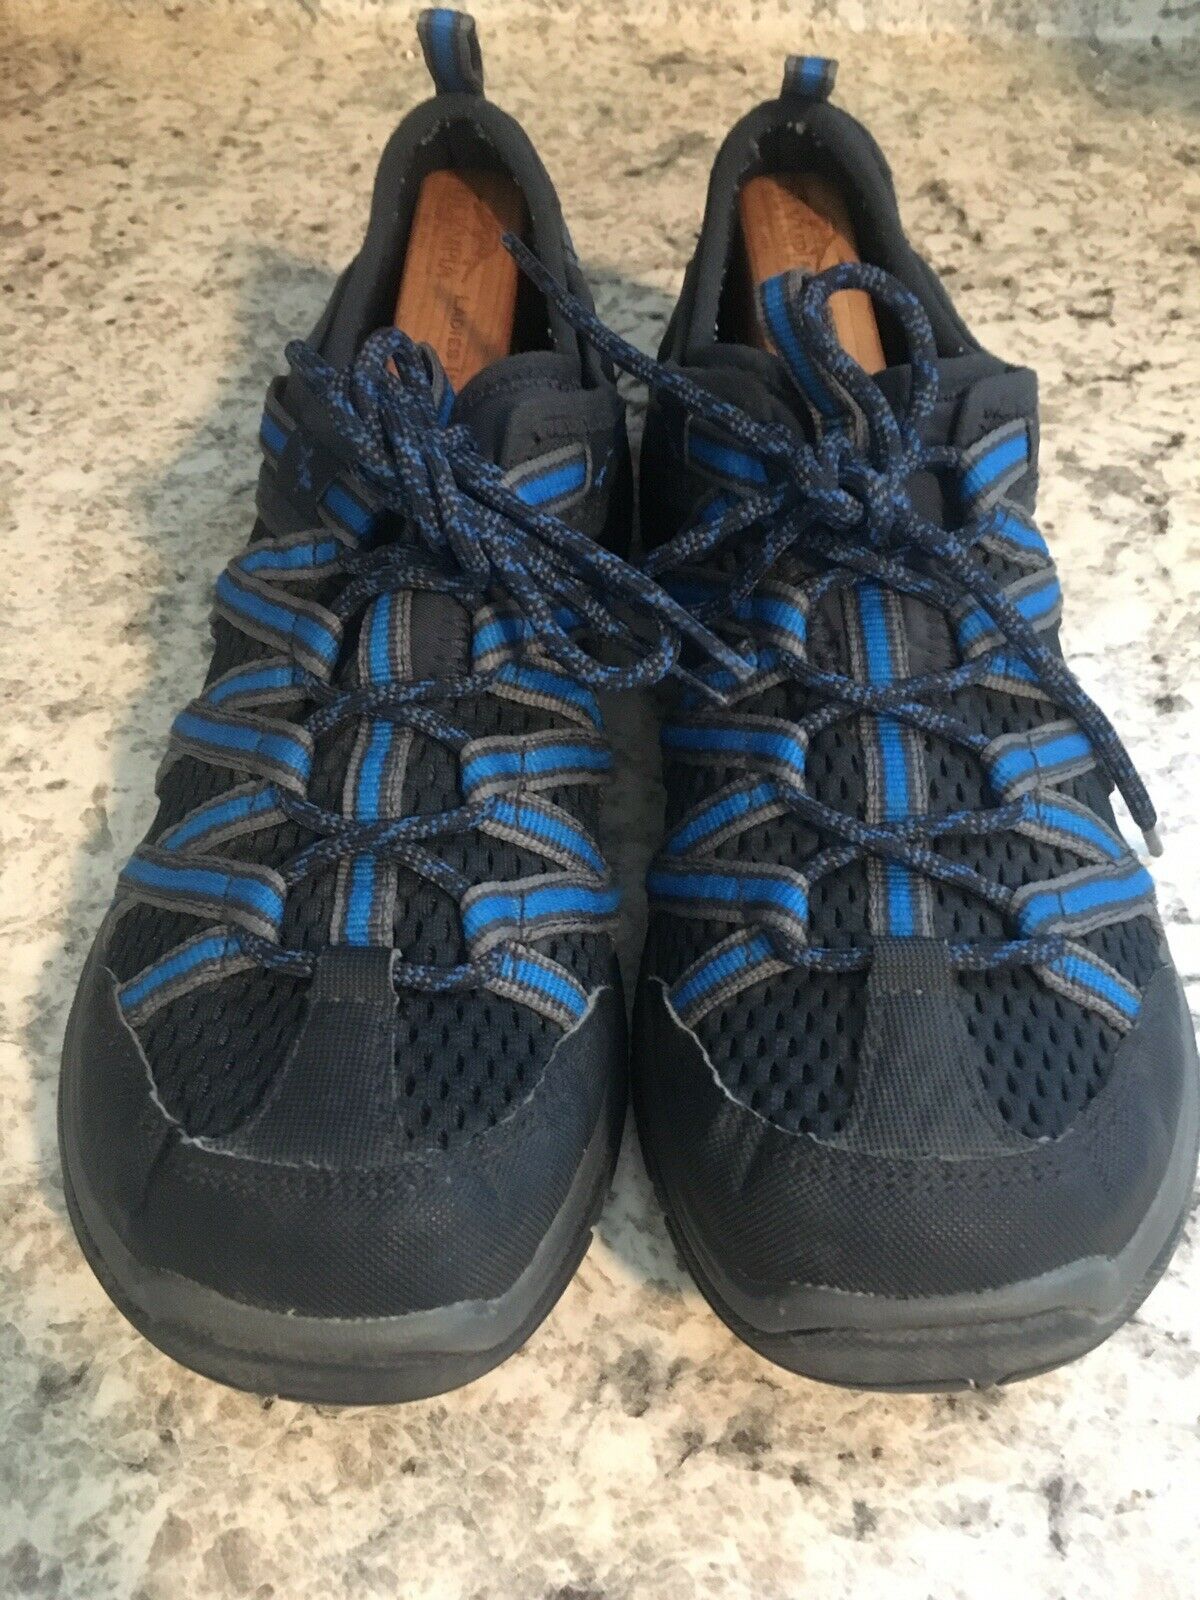 CHACO Outcross Evo 1 Hiking Water Shoes - WOMEN's Size 9.5 - NAVY Blue ...